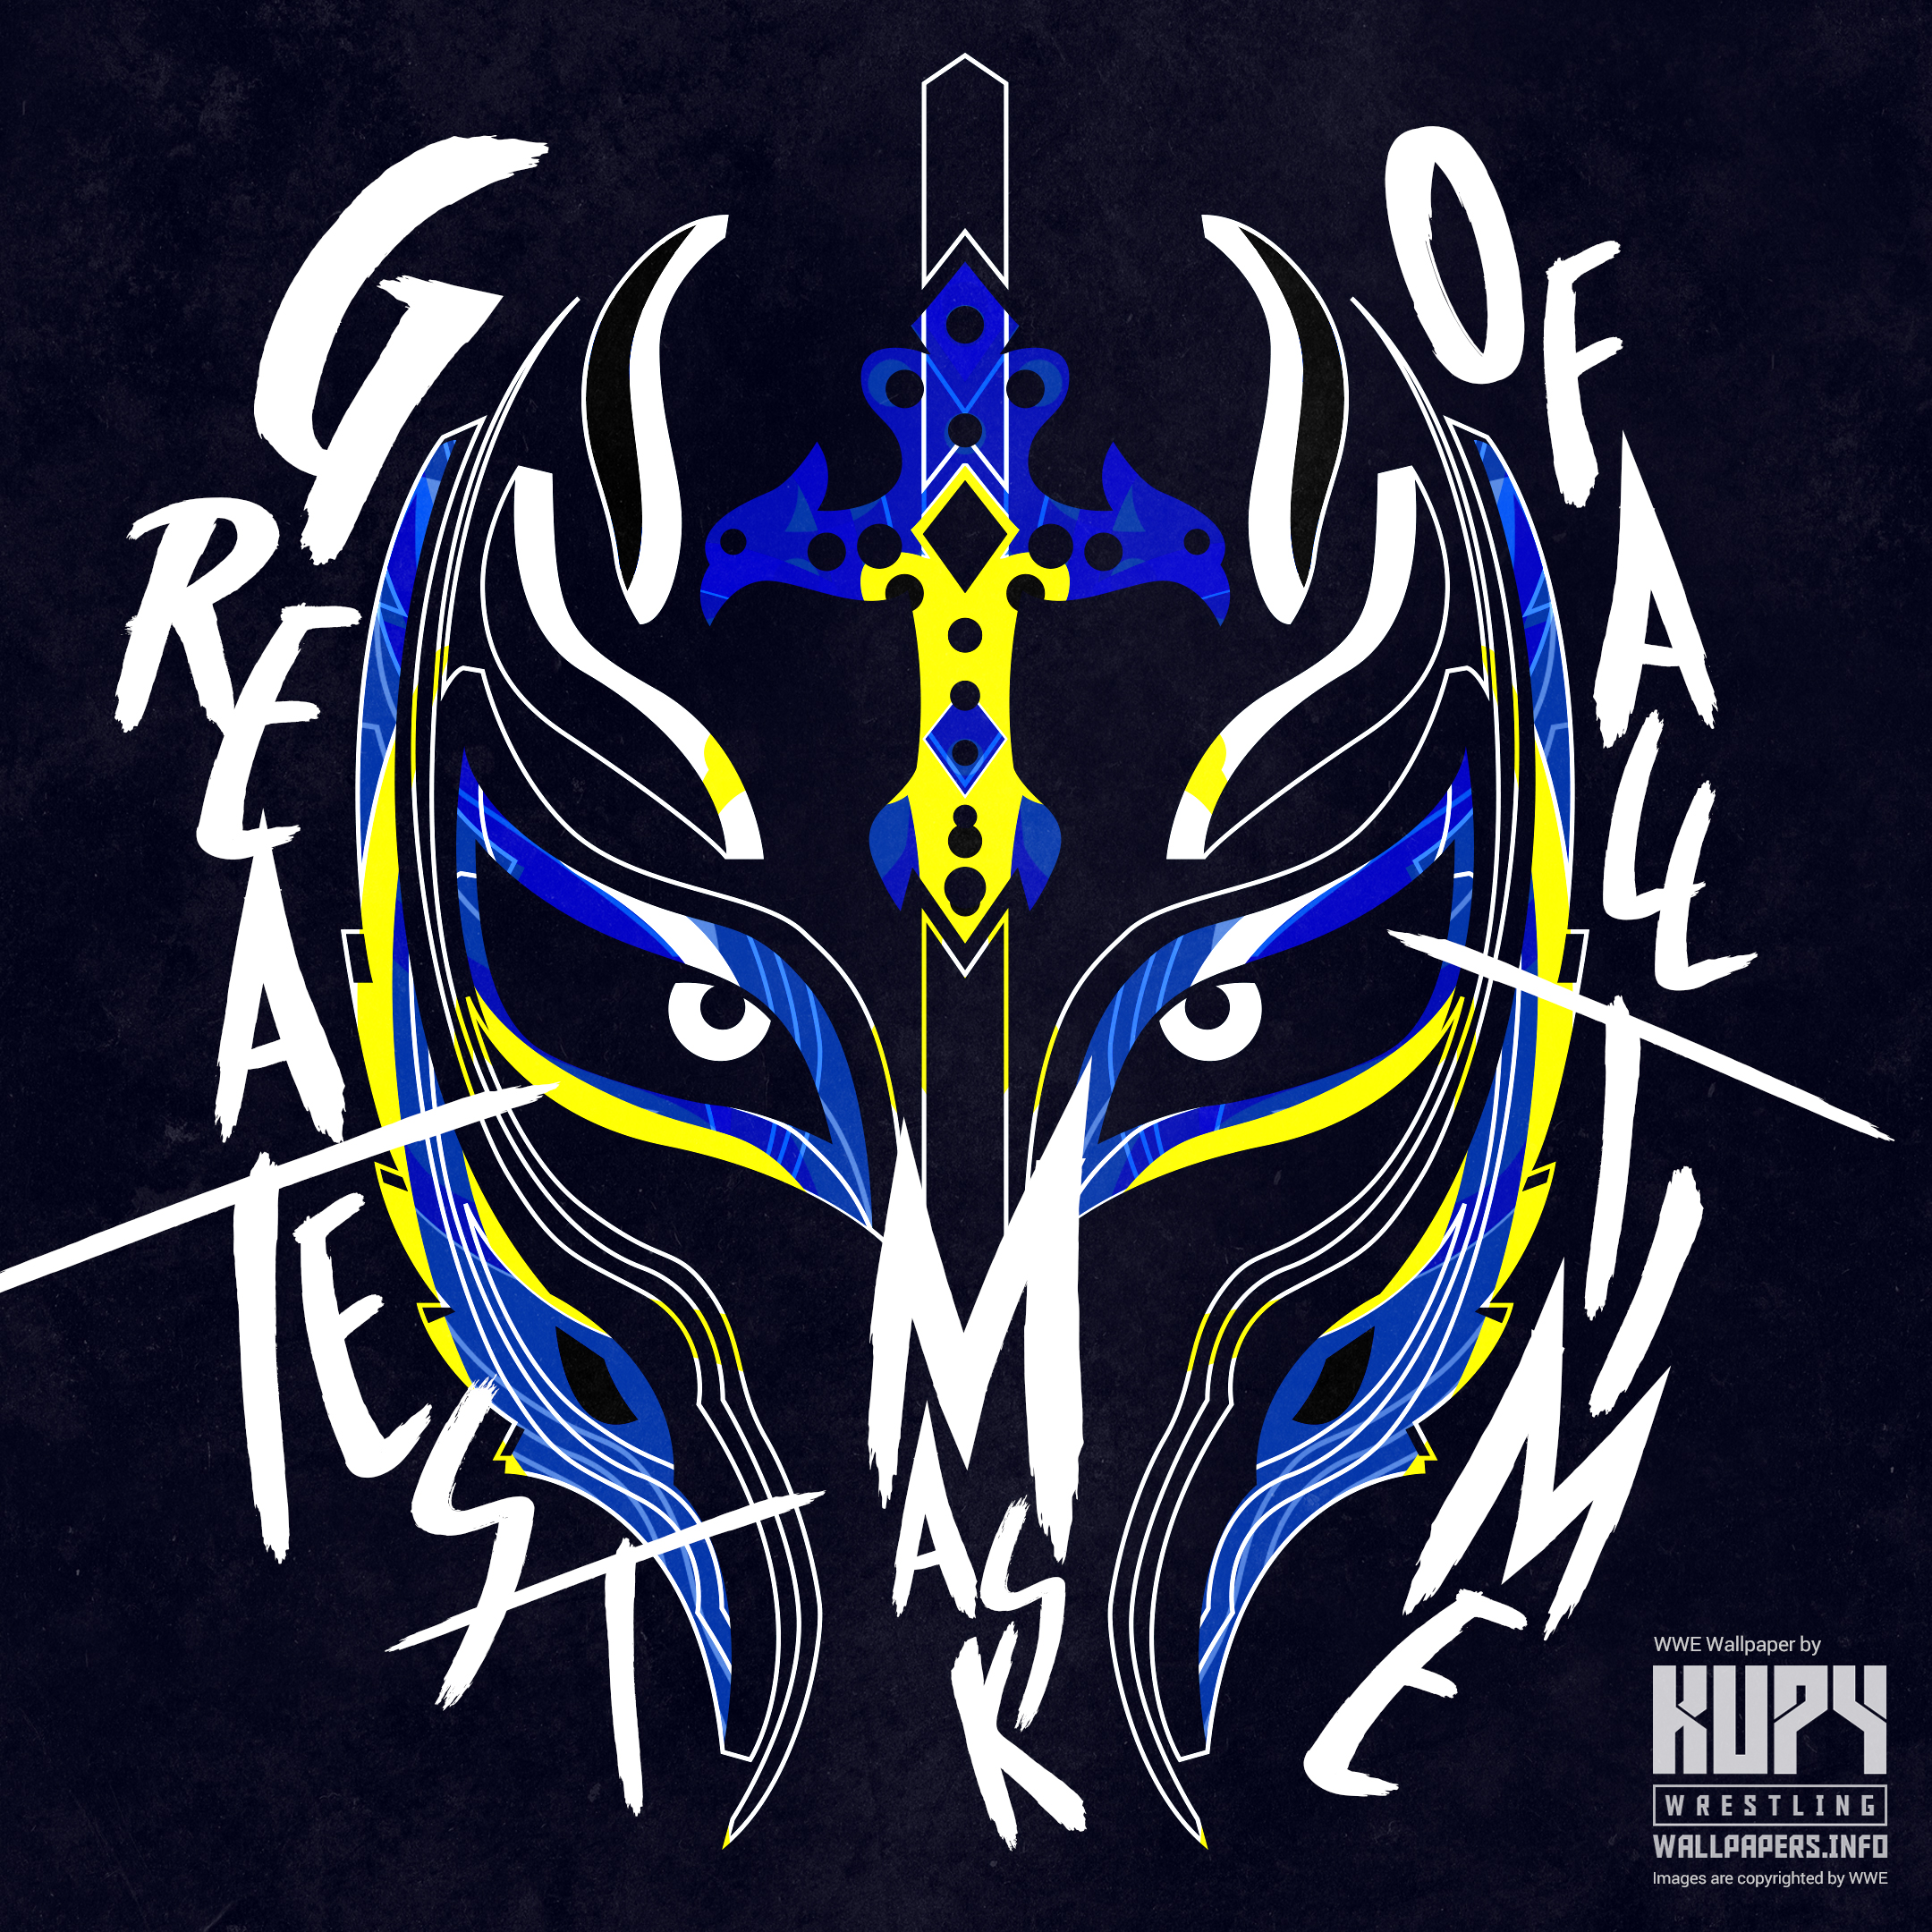 Rey Mysterio Archives - Kupy Wrestling Wallpapers